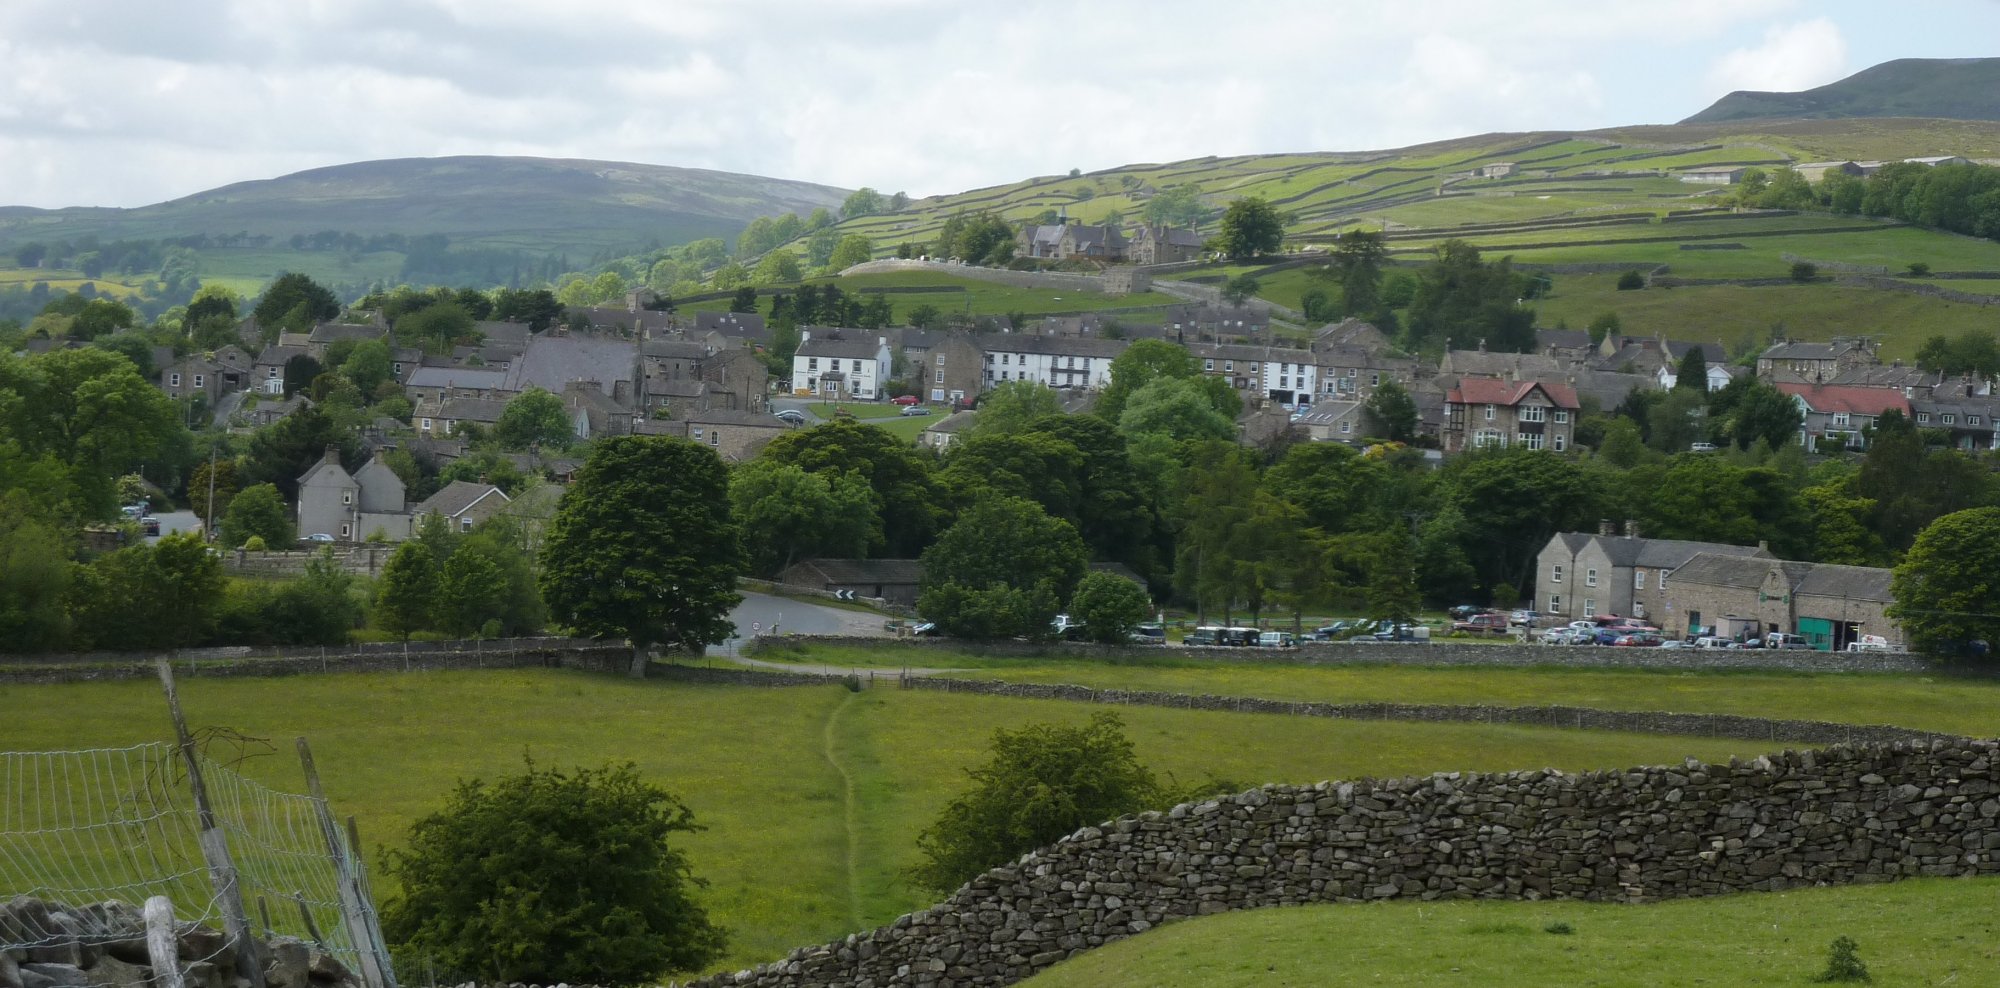 On final approach to Reeth